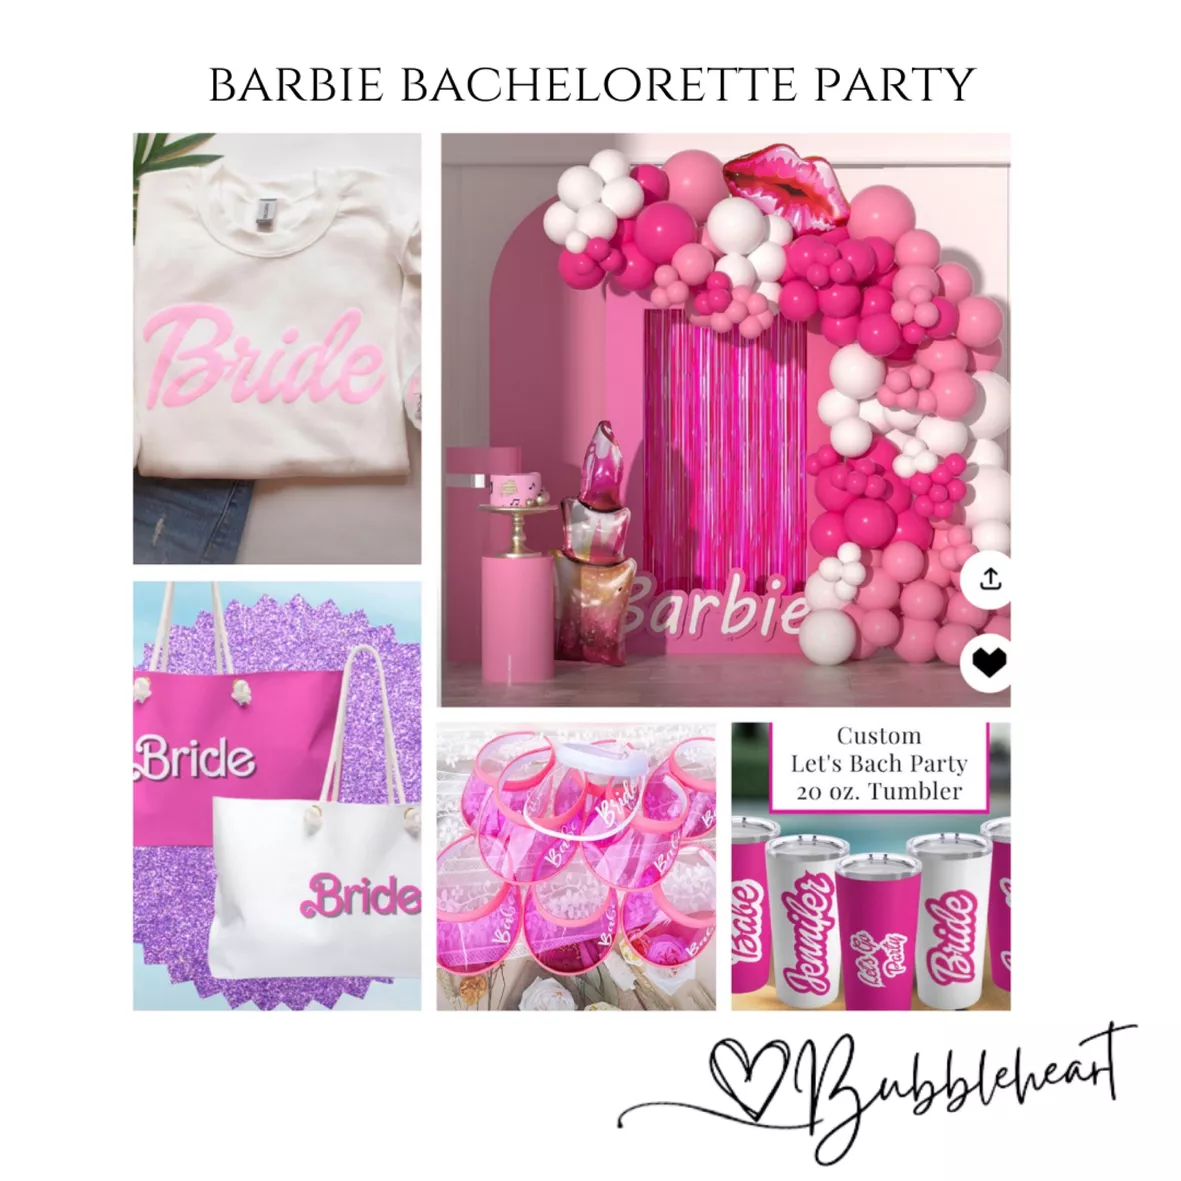 Barbie™ Classic Clog curated on LTK